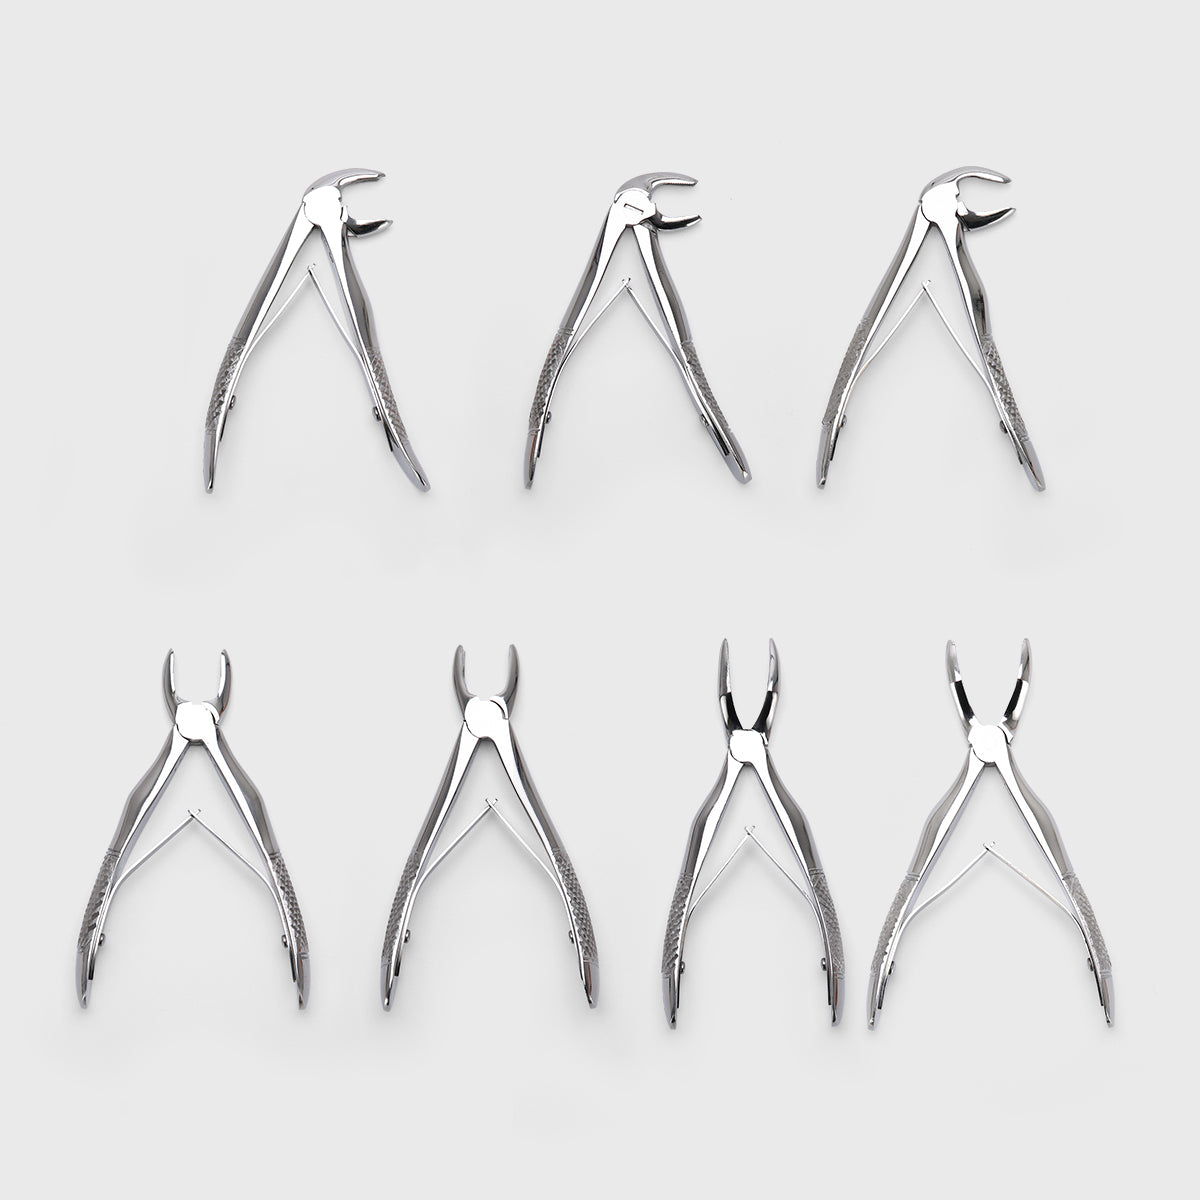 Dental Surgical Instruments Tooth Extraction Pliers Forceps Set for Children 7Pcs - pairaydental.com